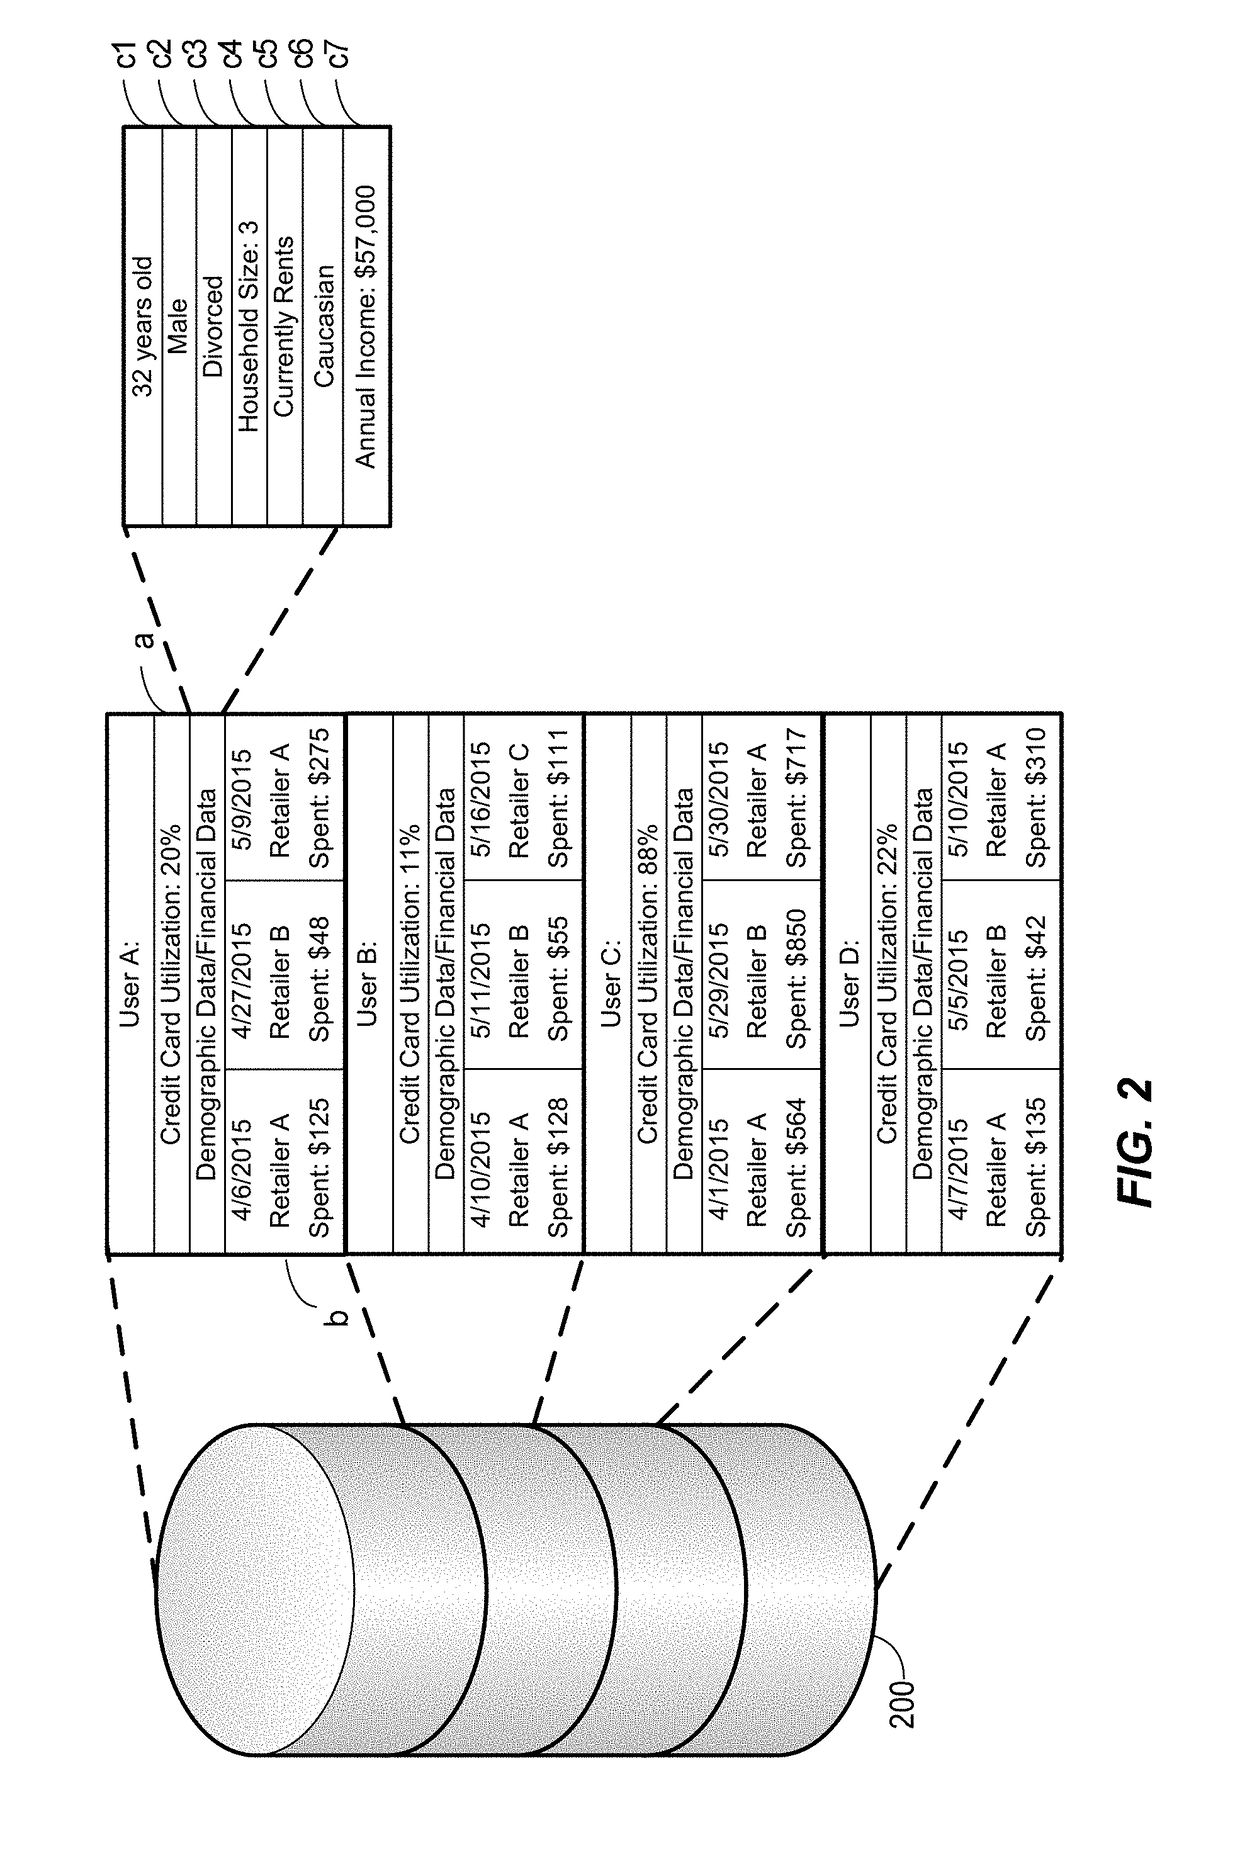 Using cognitive computing to provide targeted offers for preferred products to a user via a mobile device